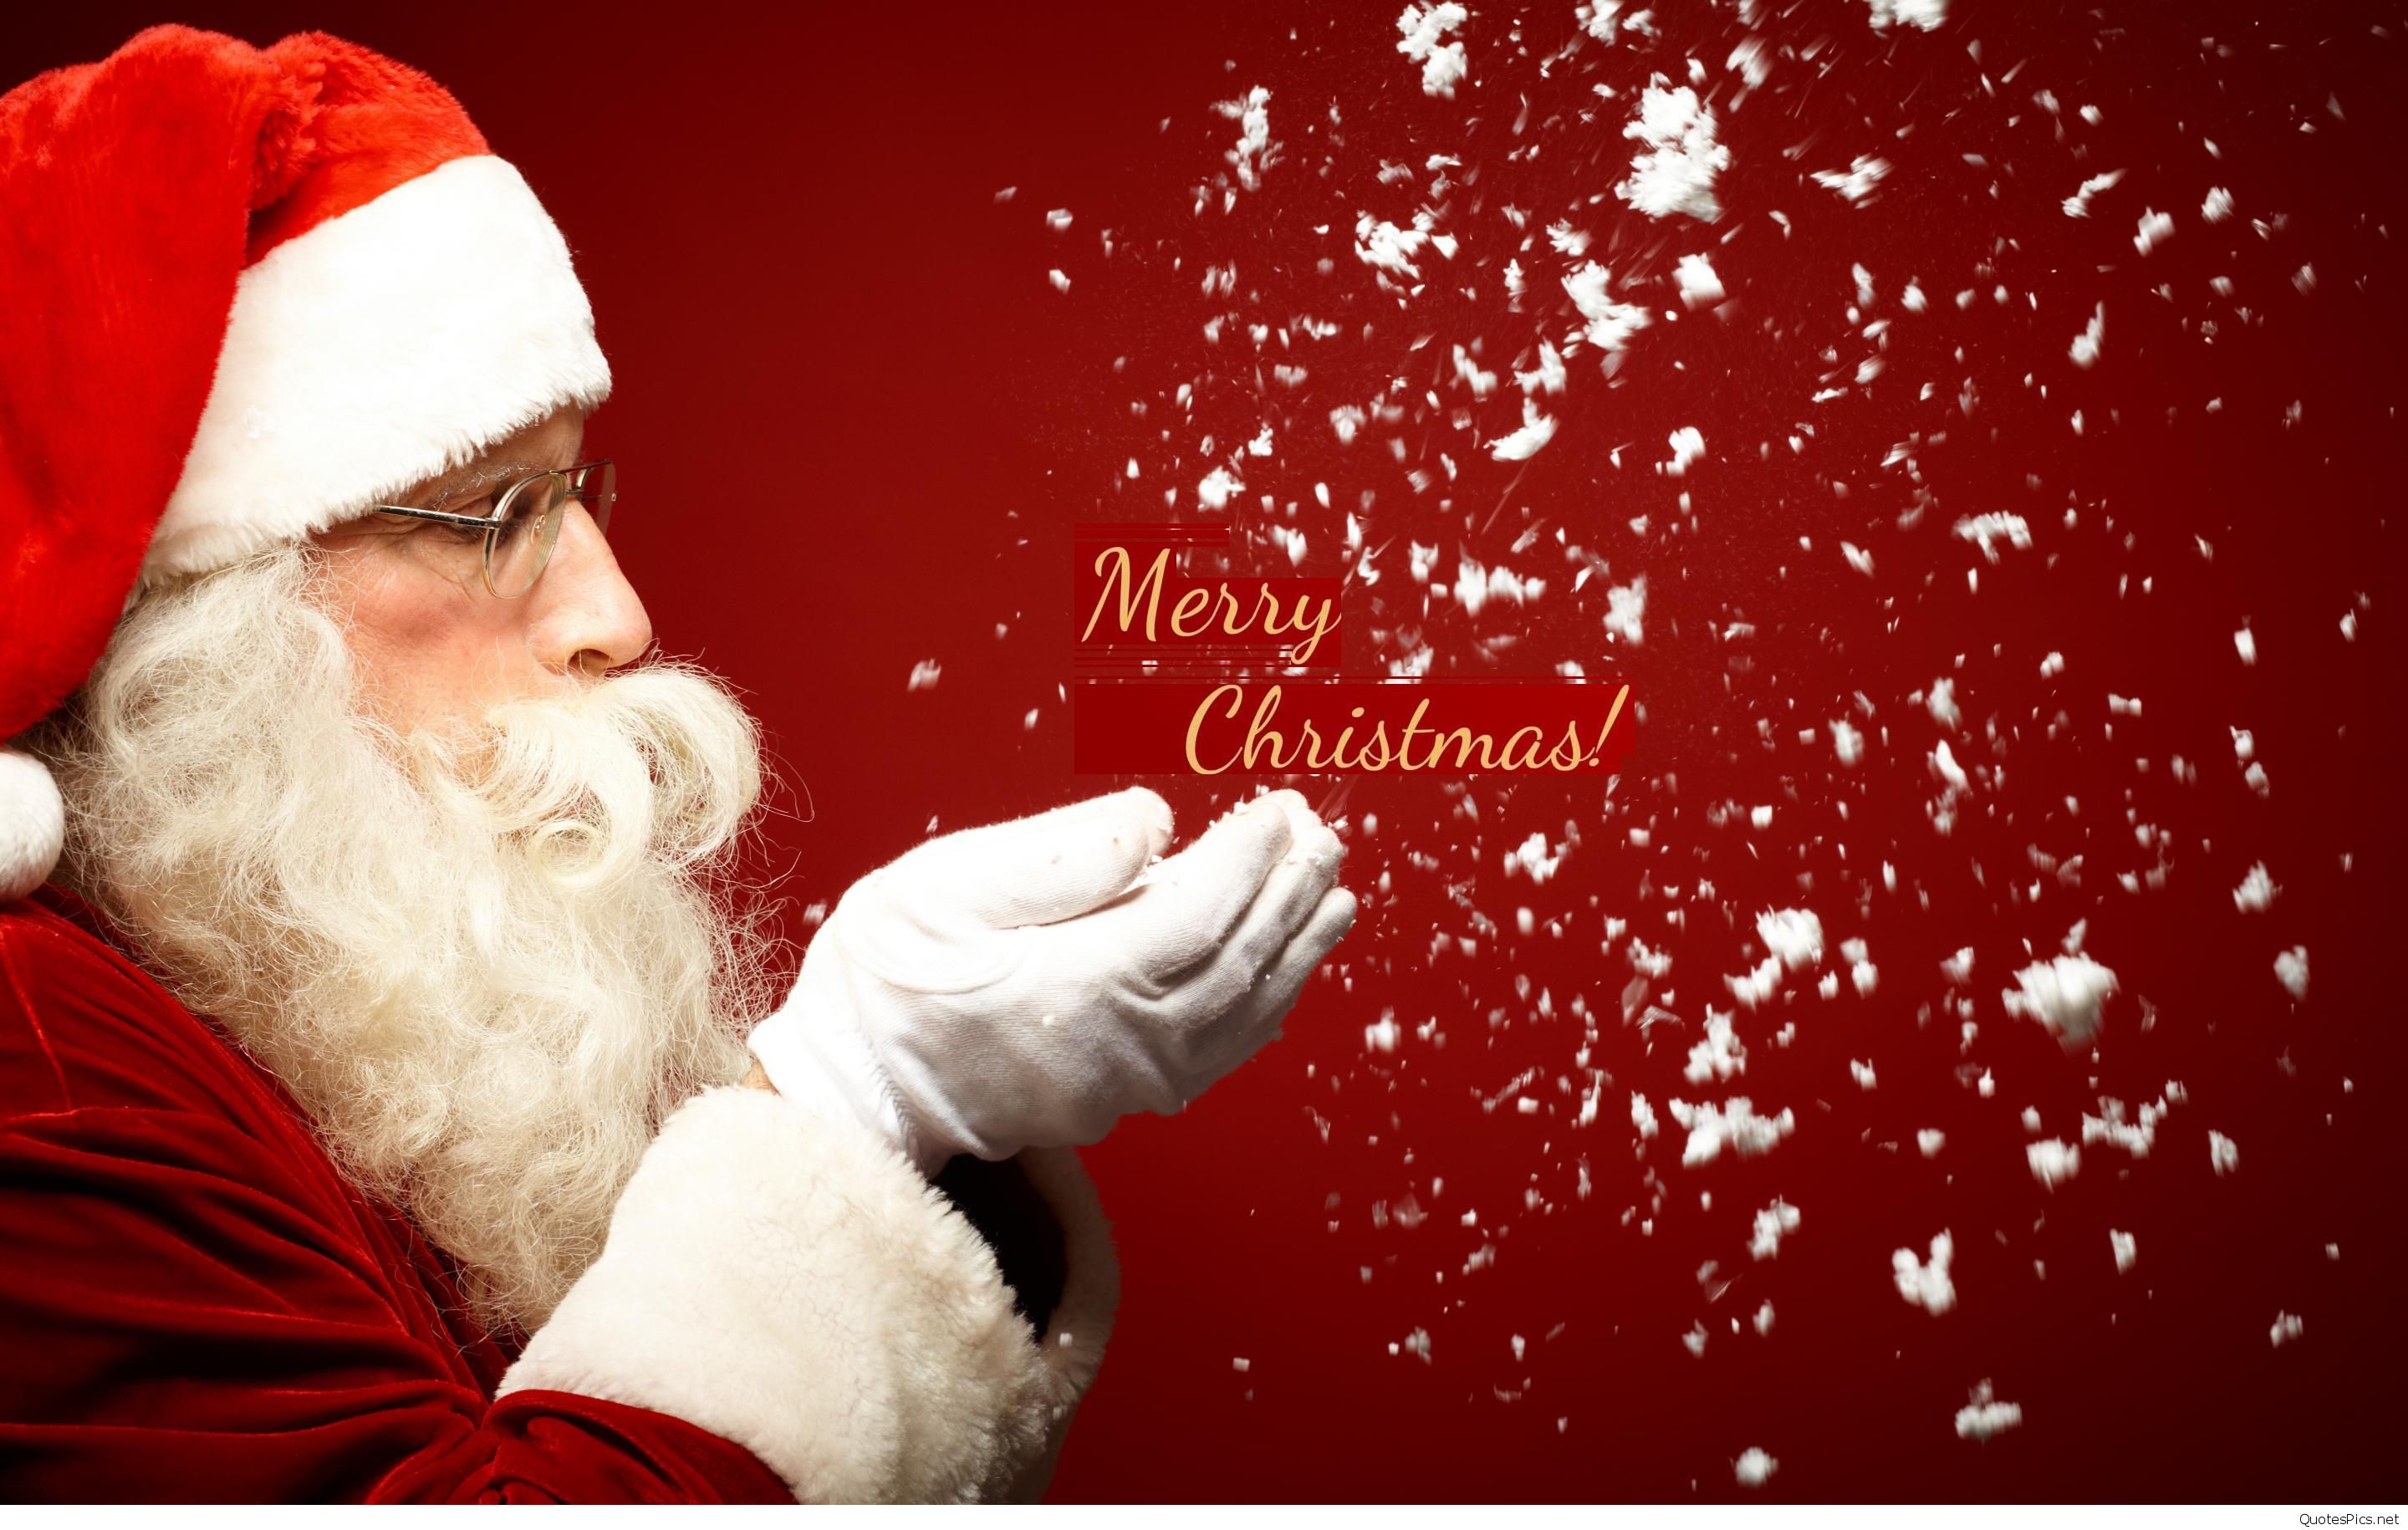 Top 10 best merry Christmas HD wallpapers - The Indian Wire